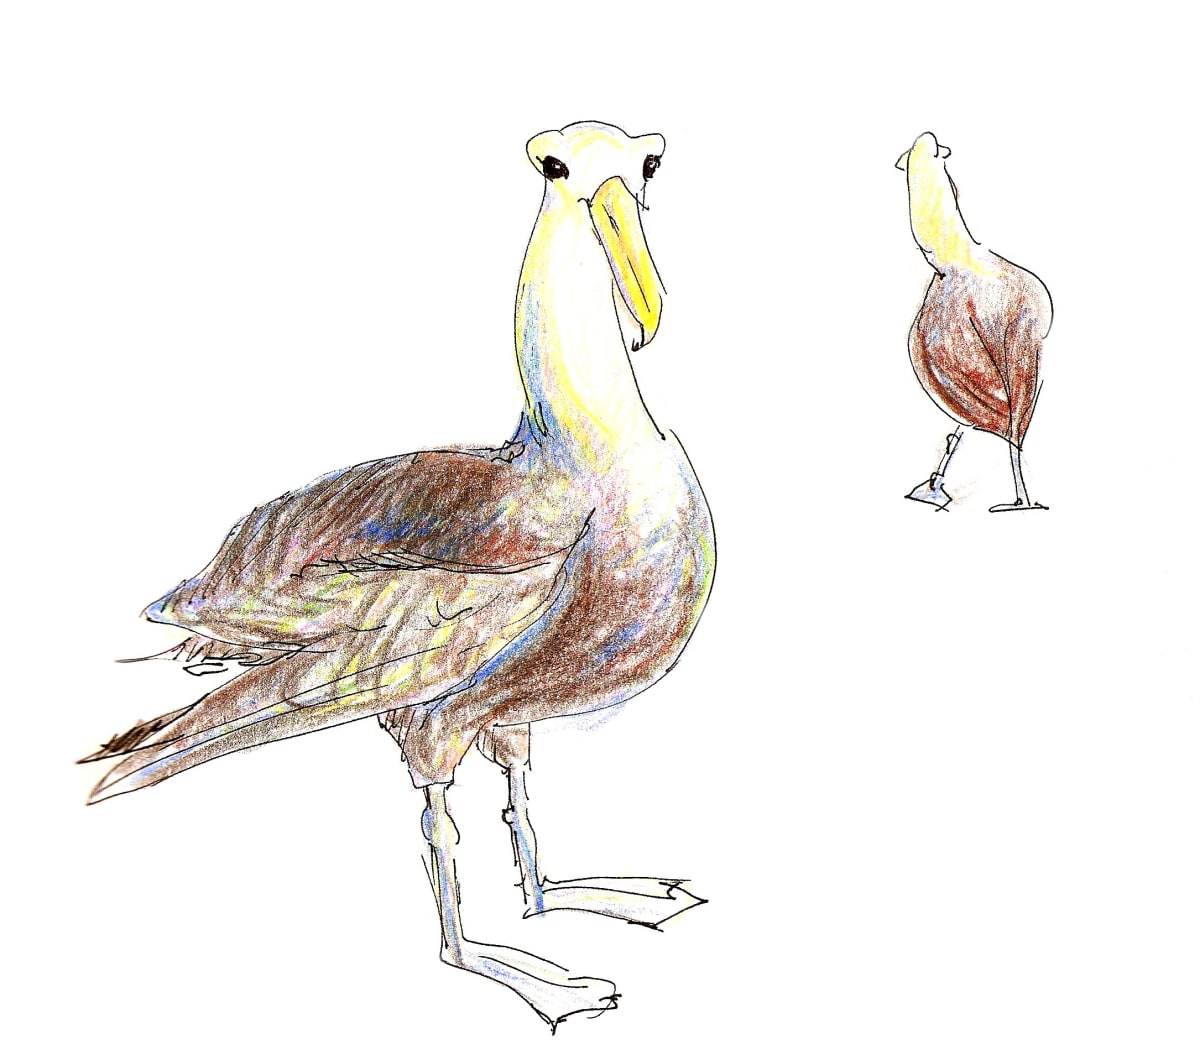 Waved albatross waddle by Abby McBride  Image: Field sketched on Isla Española, Galapagos (2009-10)